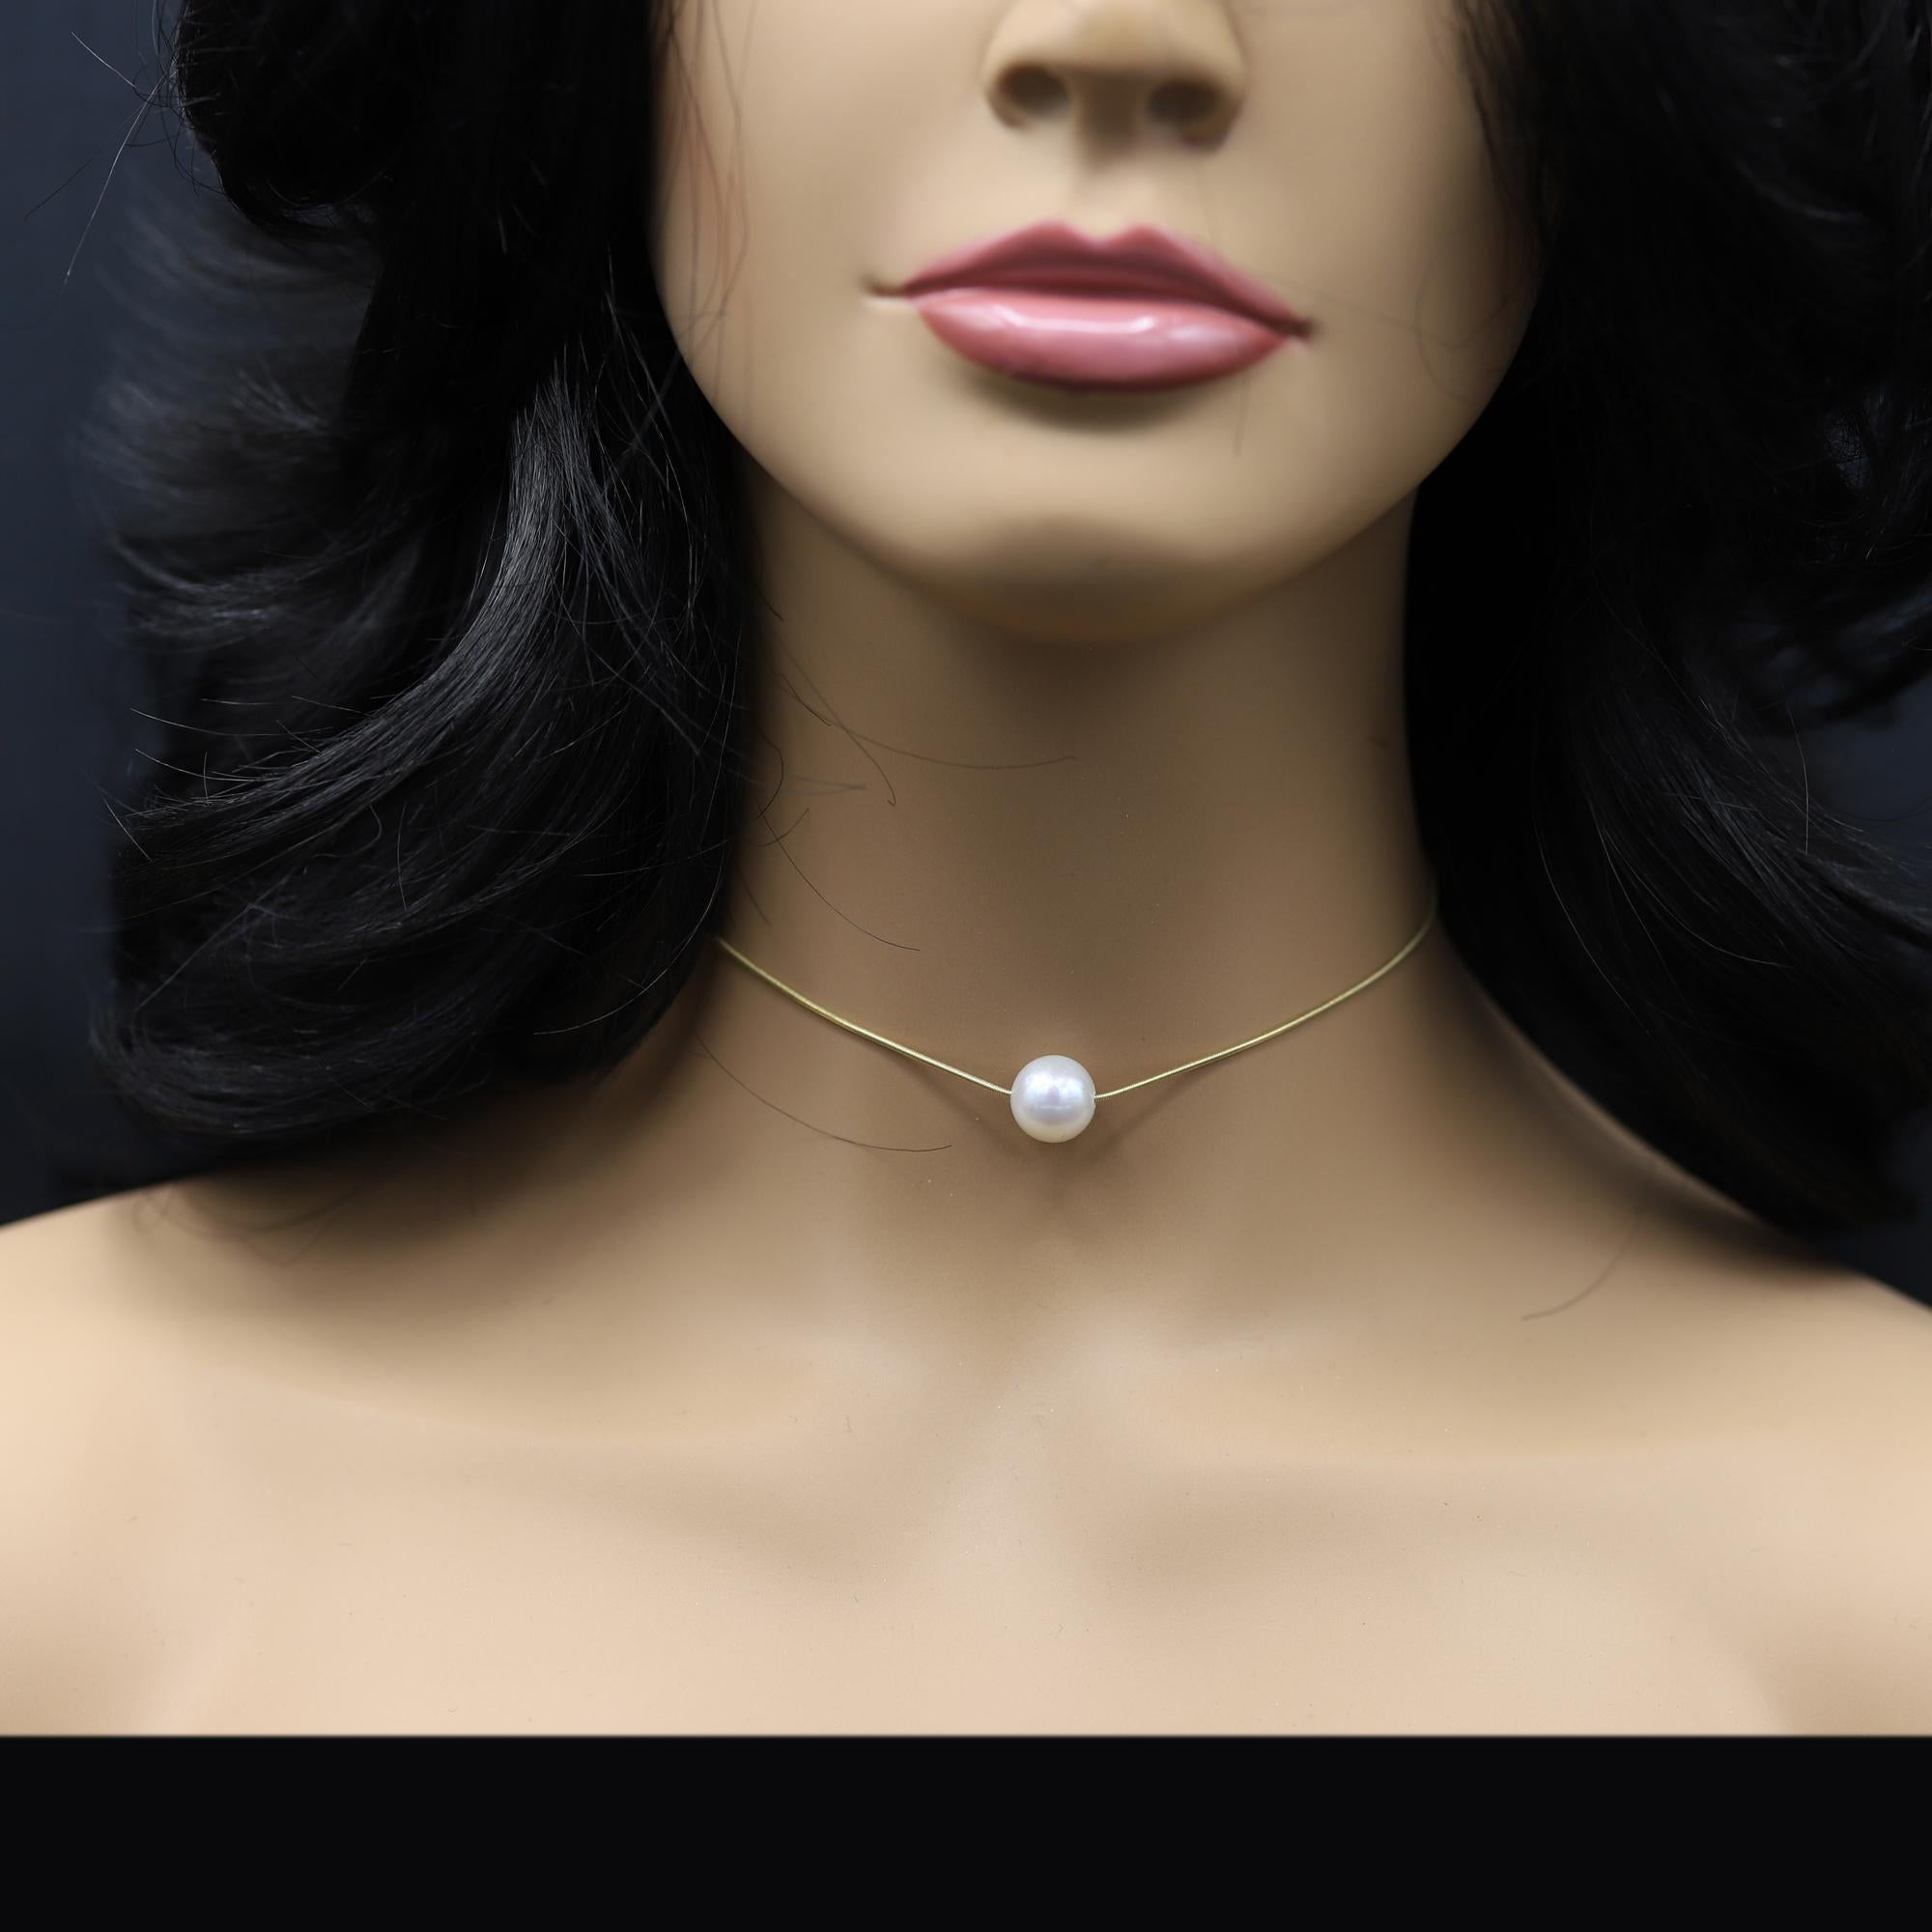 Trendy Choker - Very Elegant & Fashionable.
18k Yellow Gold snake chain - thin and elegant, Total weight 6.0 grams
Pearl size is 11 mm,  Good Luster fresh- water pearl
Adjustable extension 12.5' - 15.25'  Inch - great for choker sizes
Chain type -